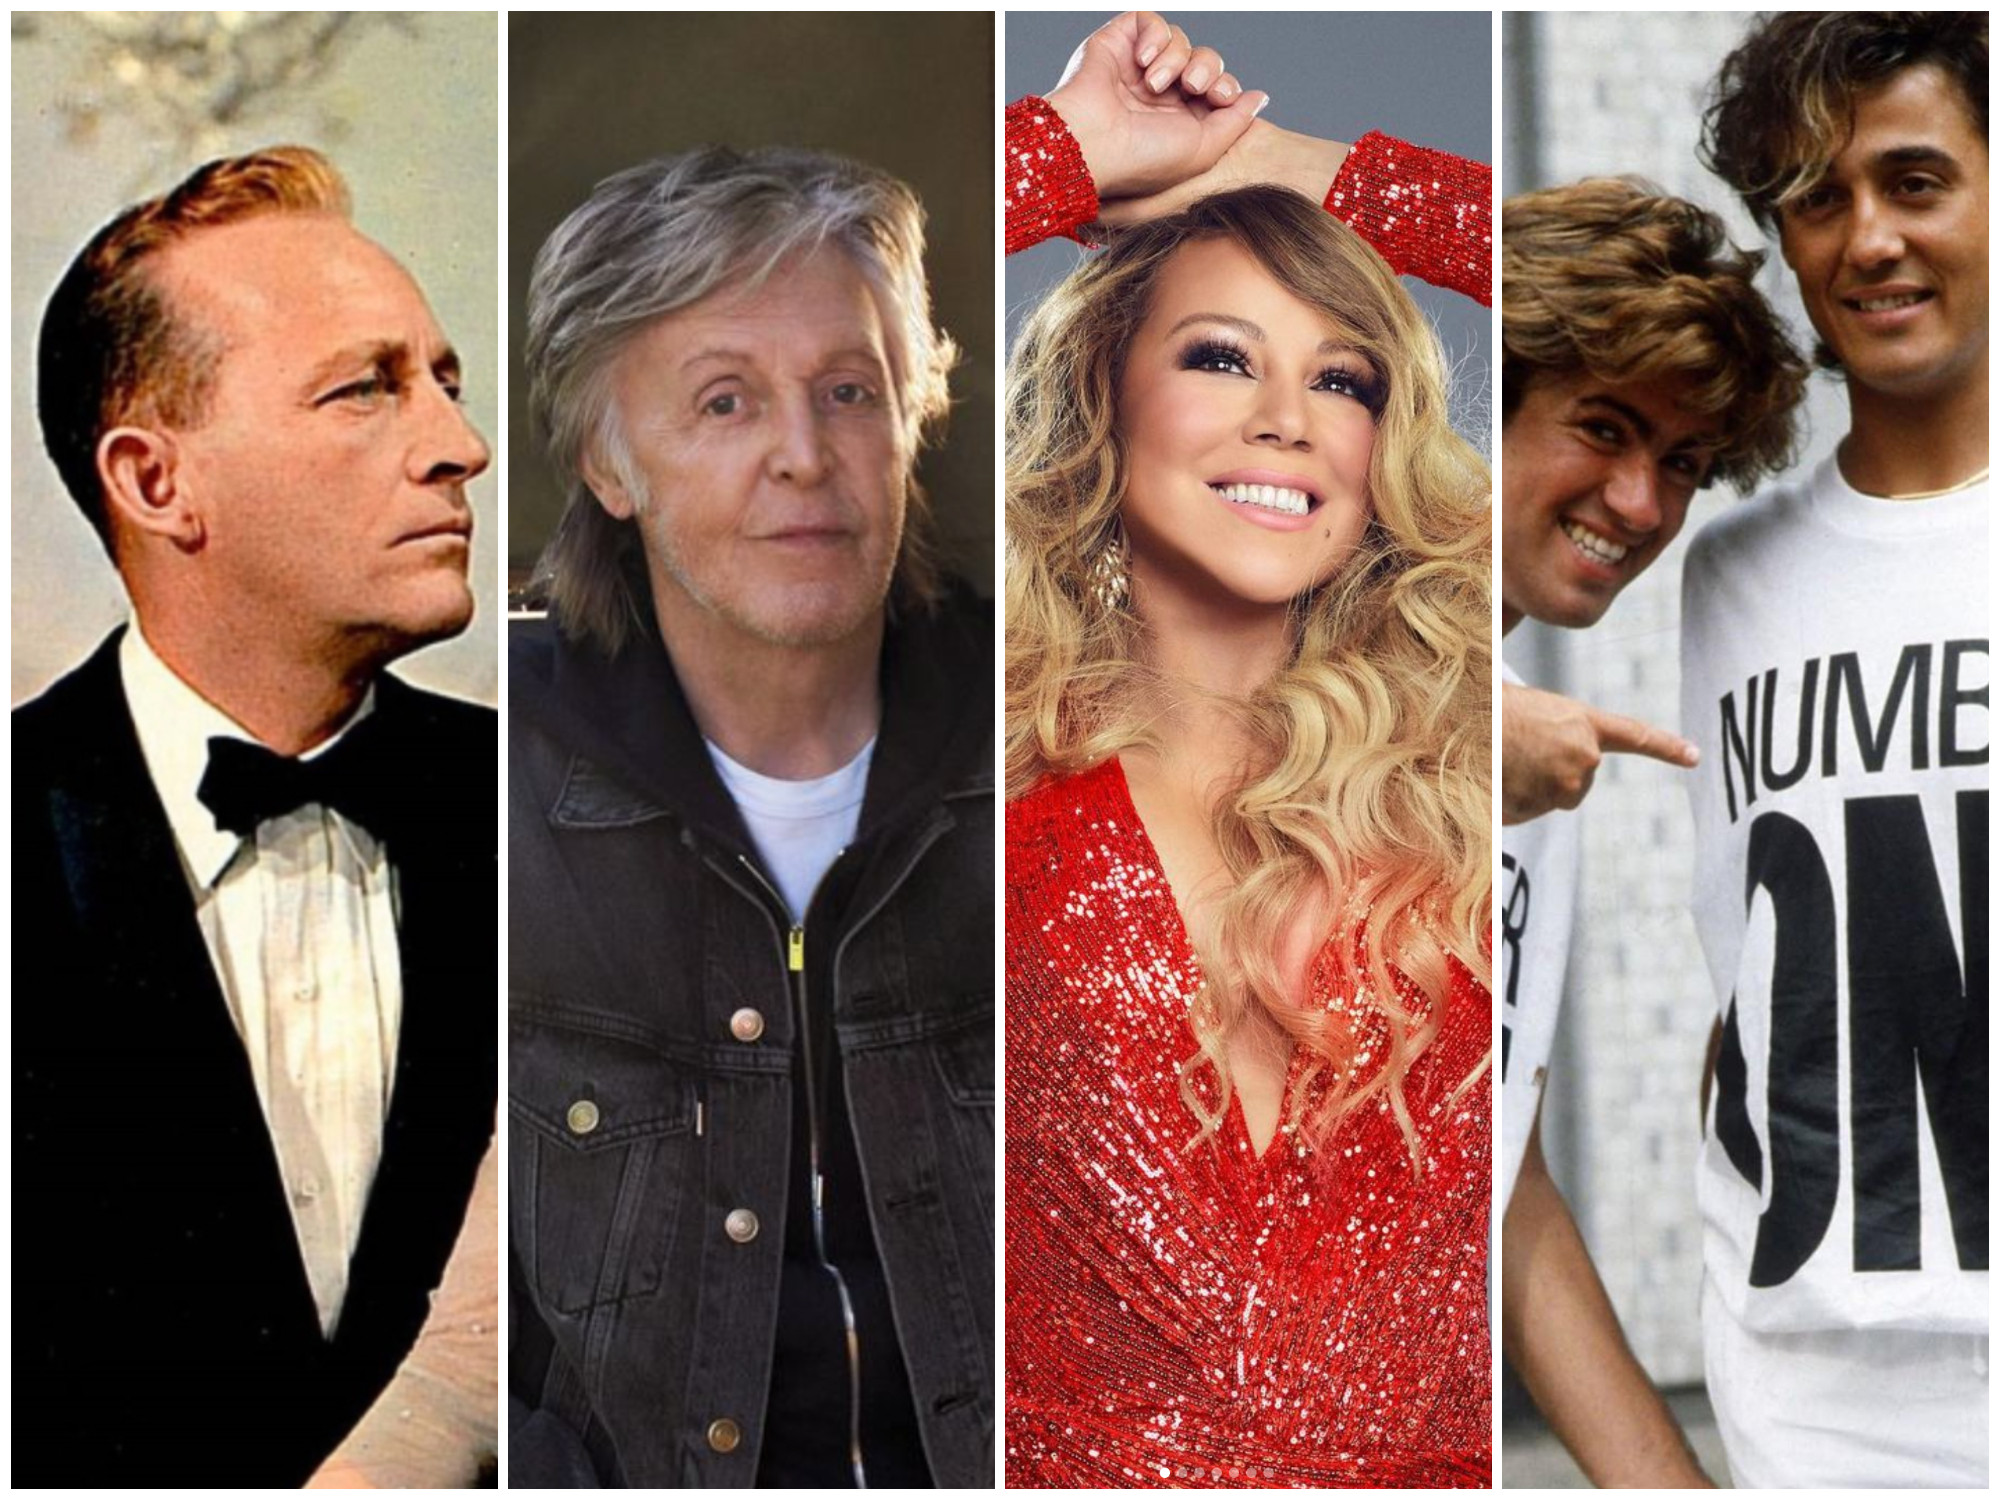 The most lucrative Christmas songs ever, brought to you by Bing Crosby, Paul McCartney, Mariah Carey and Wham!. Photos: Handout; @paulmccartney, @mariahcarey, @georgemichael_andrewridgeley/Instagram